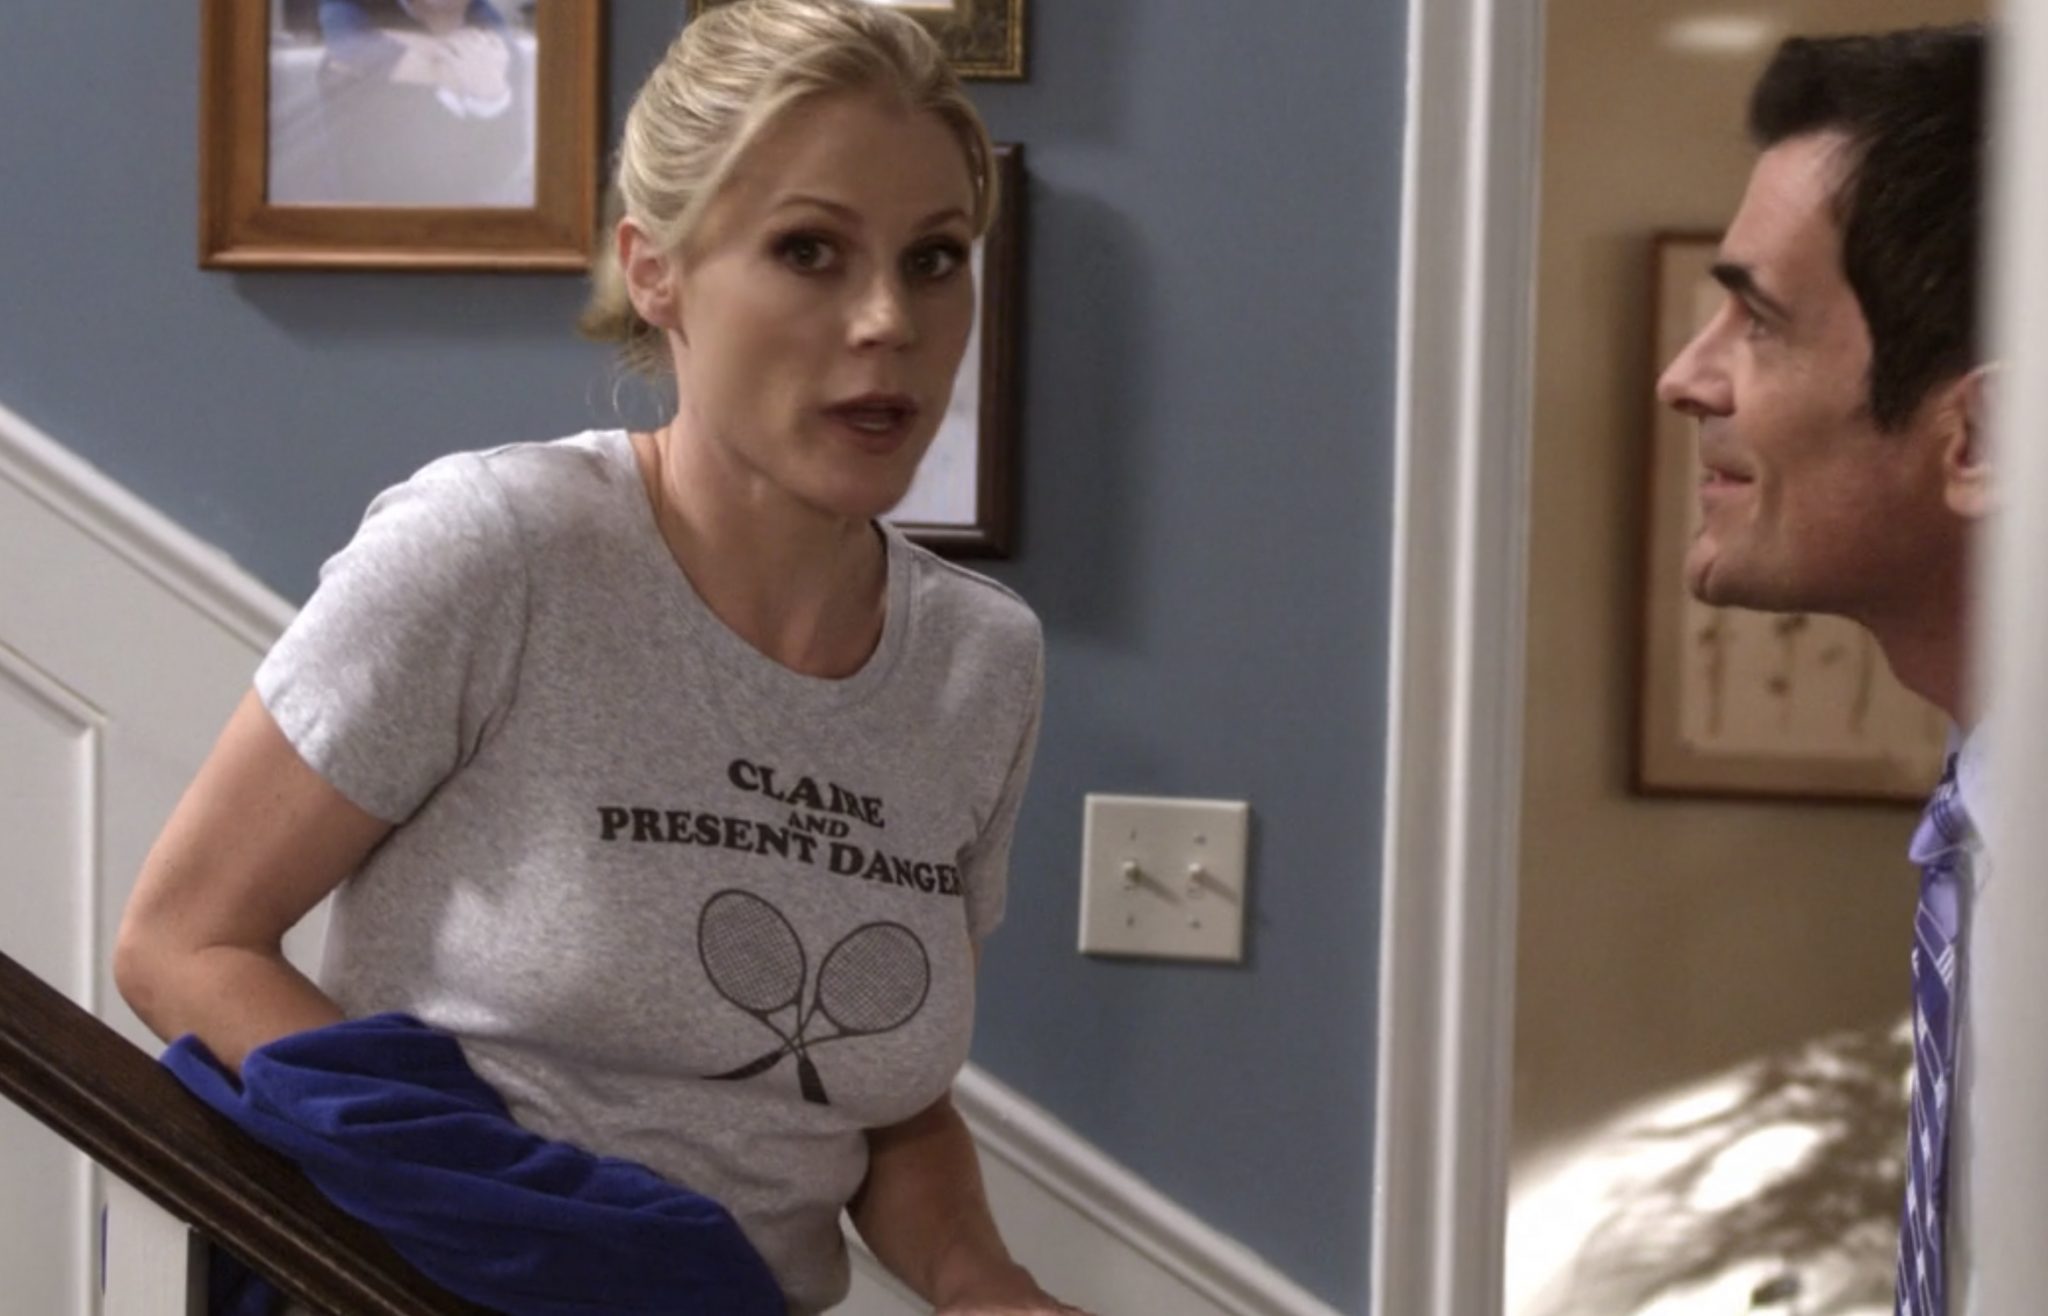 Modern Family: Claire and Present Danger – T-Shirts On Screen